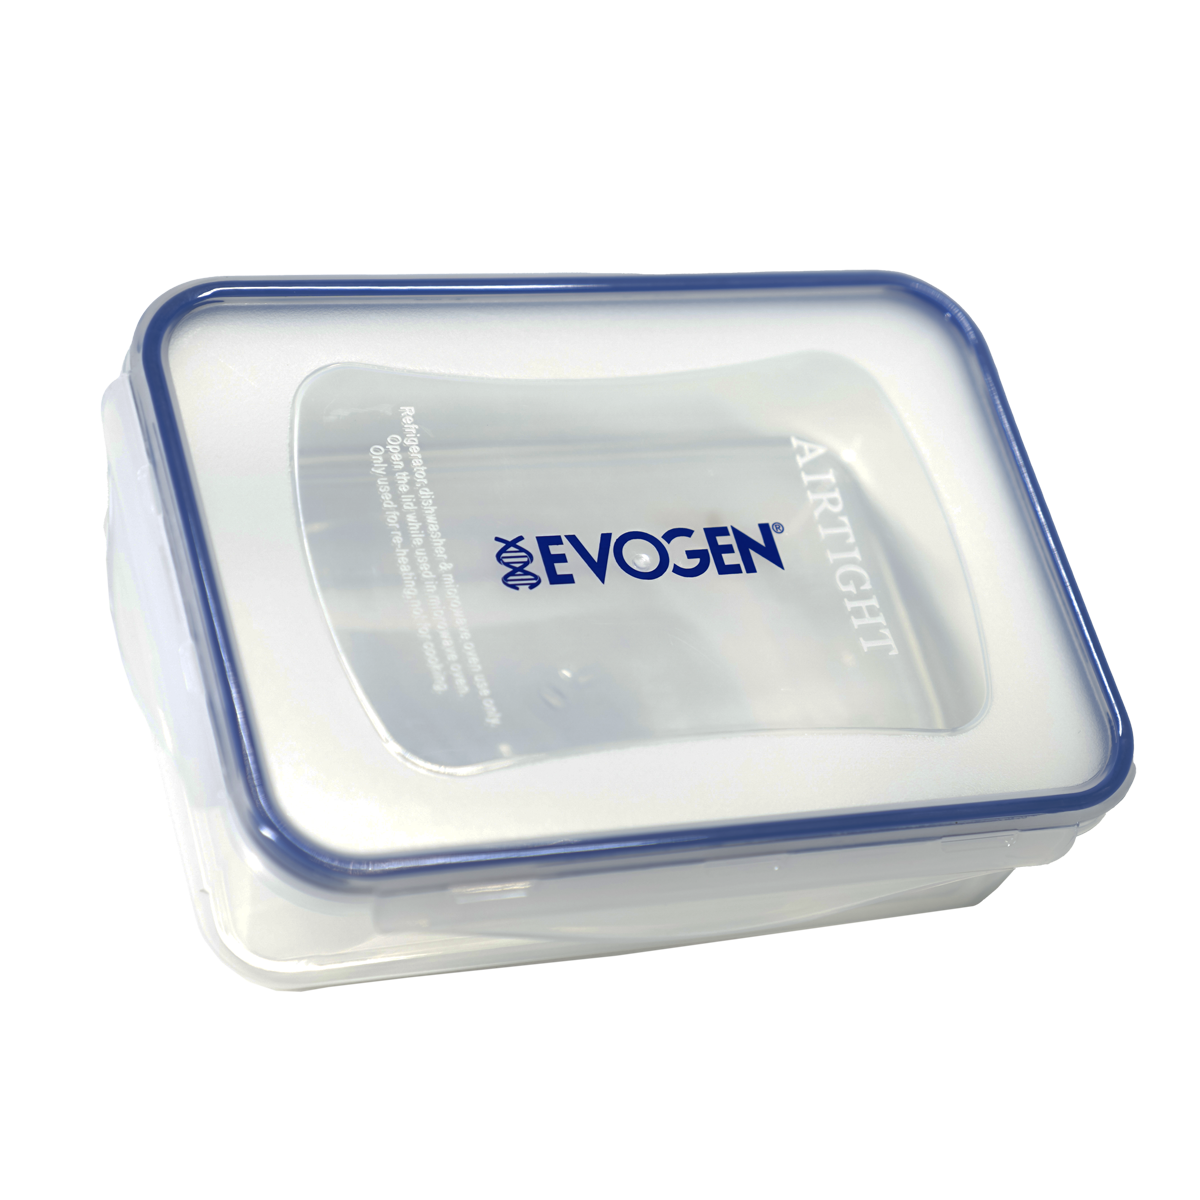 Freezer-Safe Food Storage Containers (New)